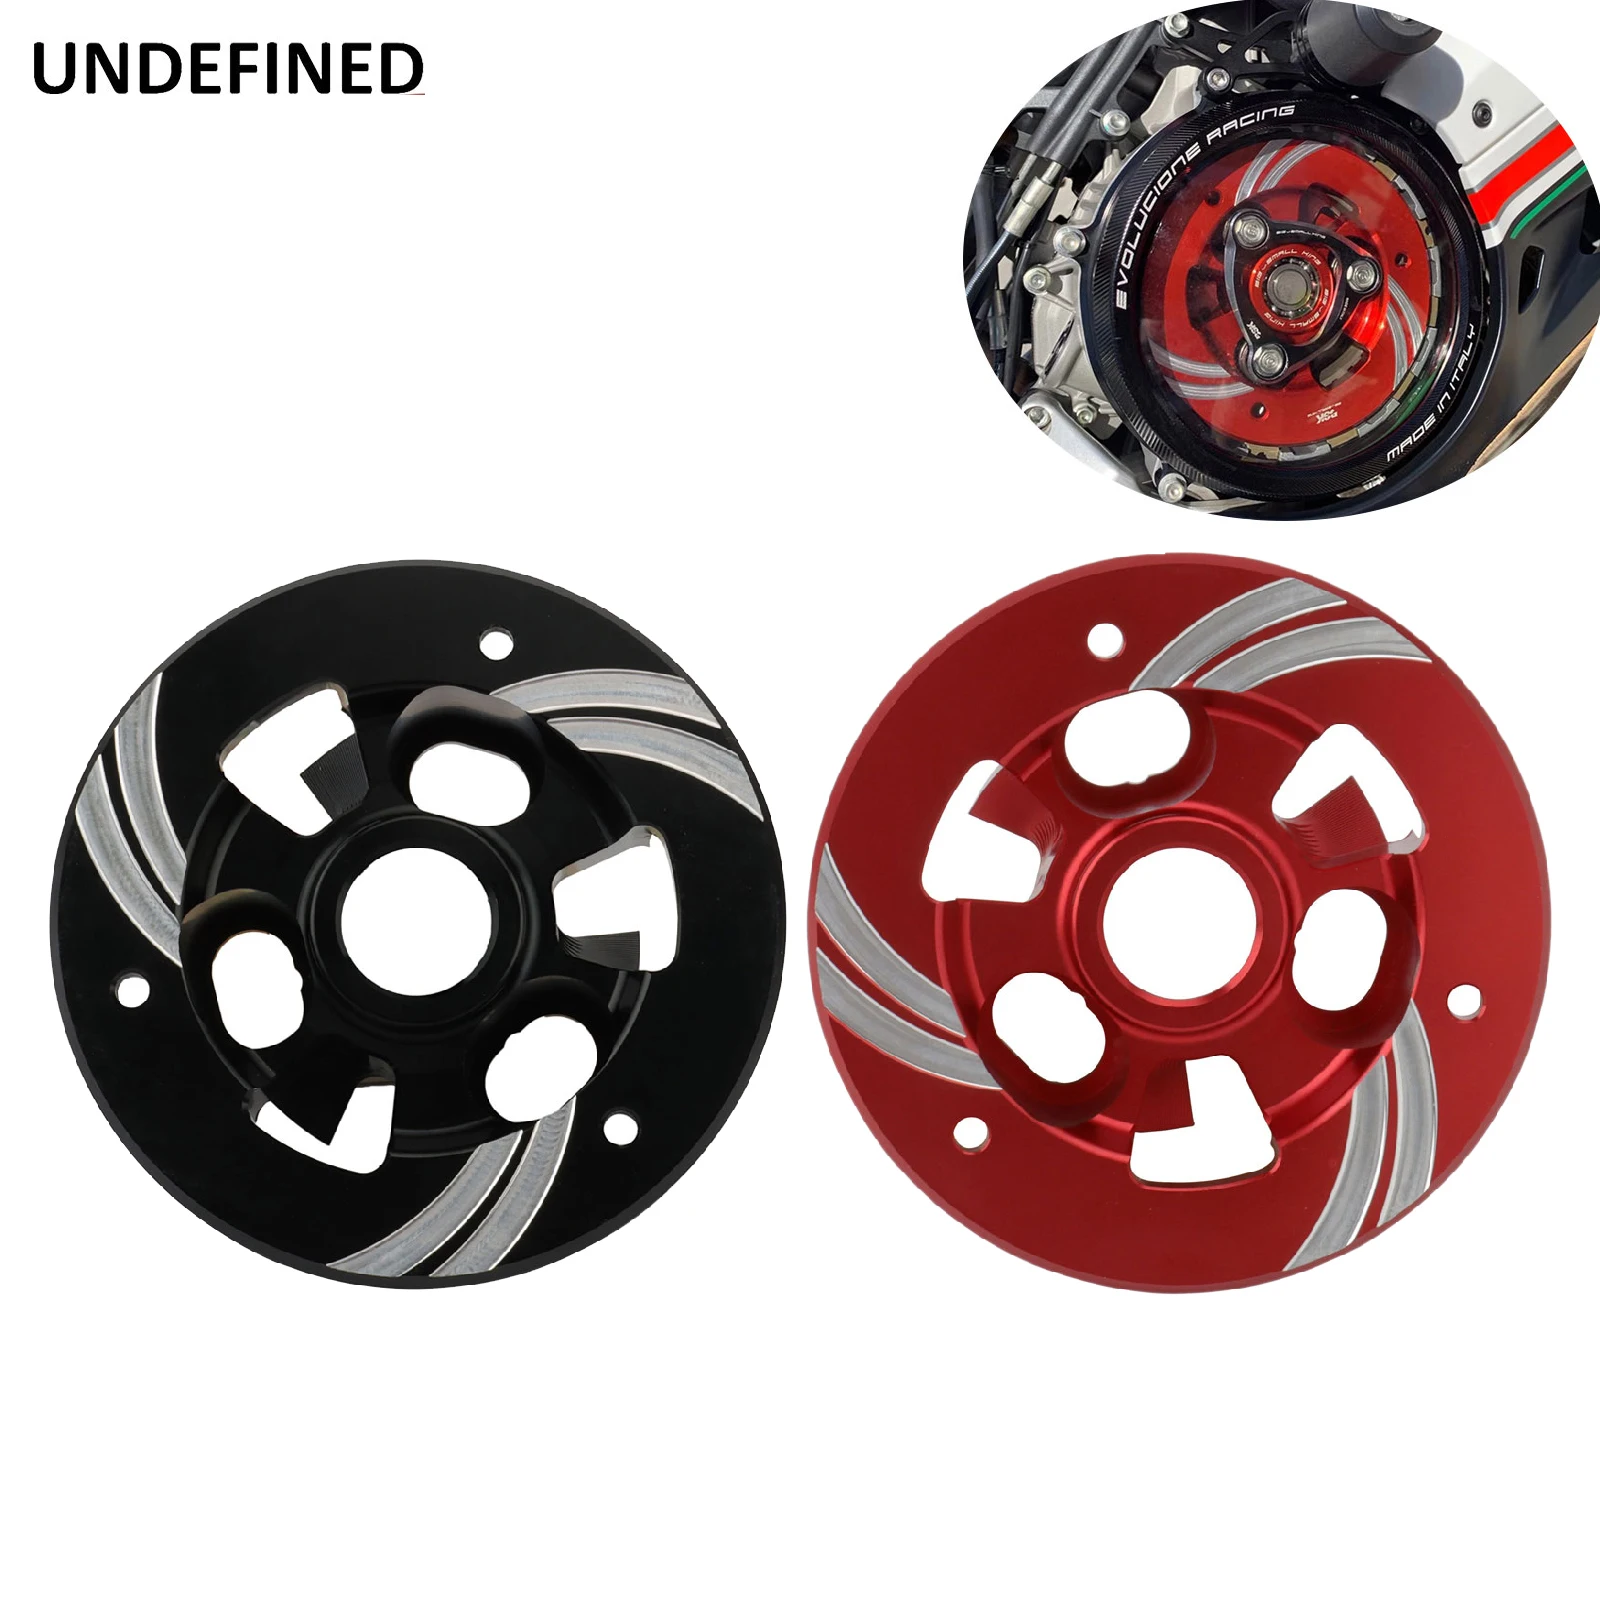 

Motorcycle Engine Clutch Cover Pressure Plate For Ducati DIAVEL 1260 S SUPERBIKE 1199 959 PANIGALE V2 HYPERMOTARD 939 THAI USA